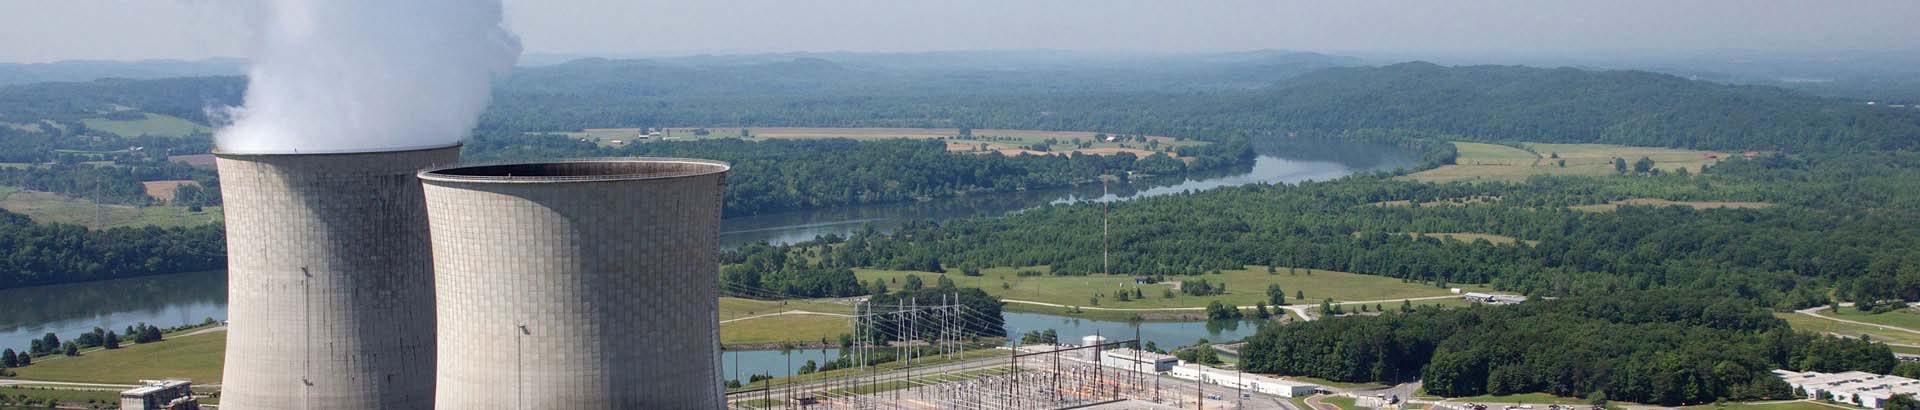 Aerial view of Watts Bar